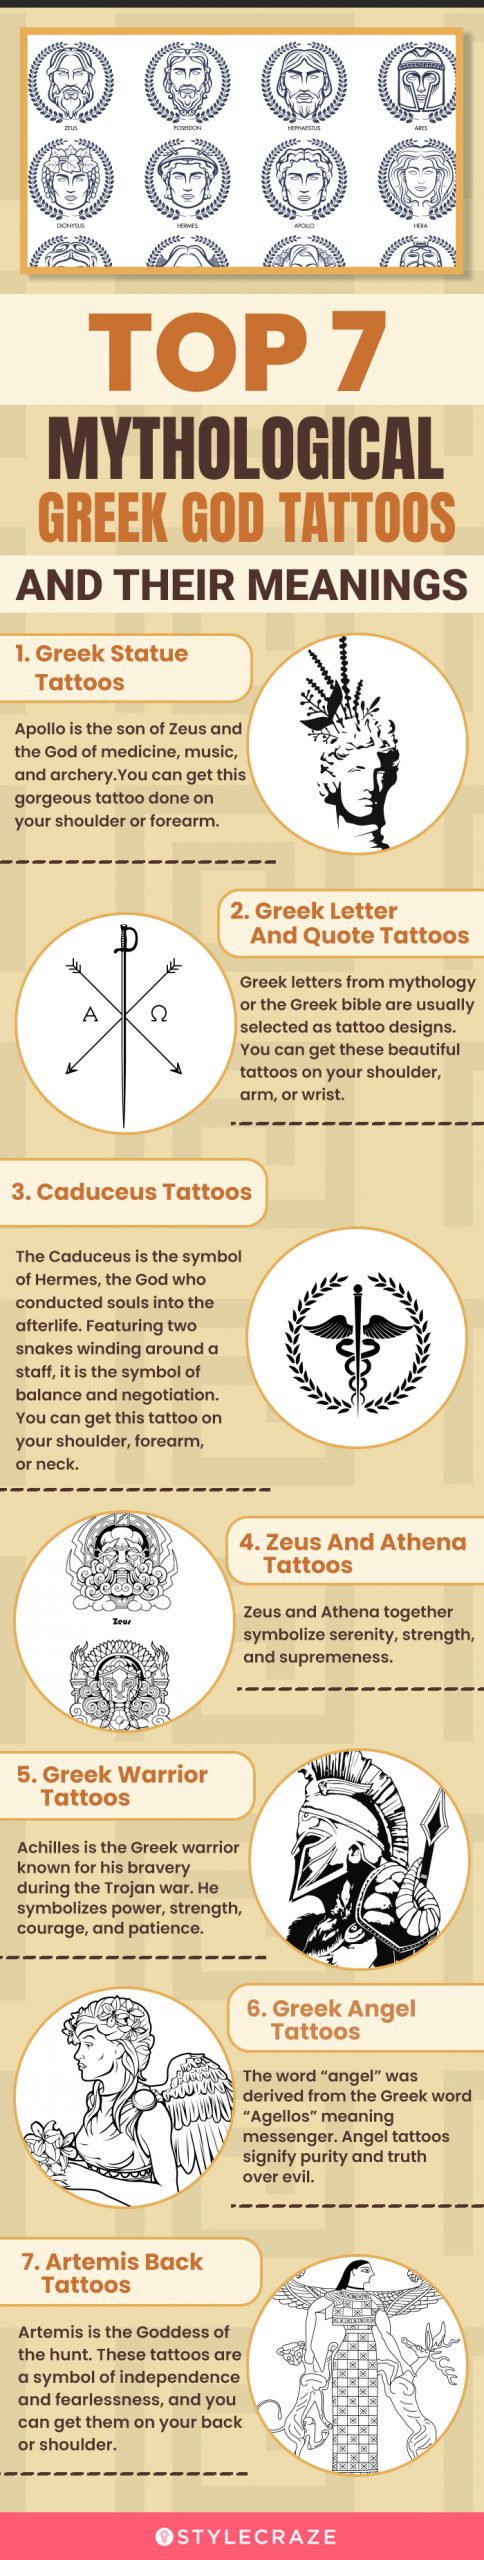 top 7 mythological greek god tattoos and their meanings [infographic]